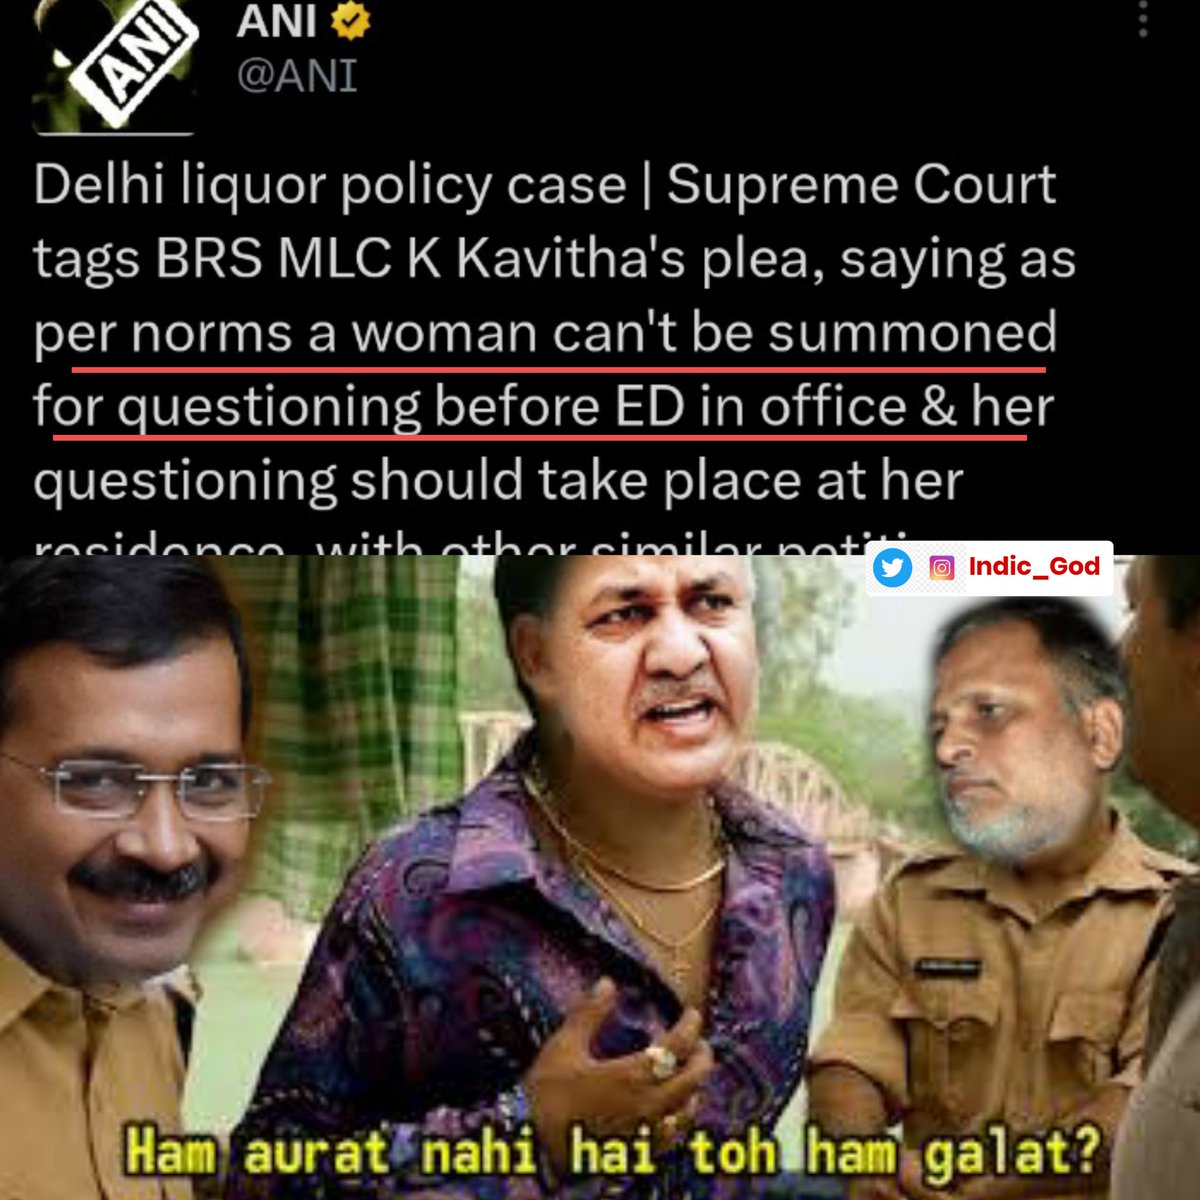 Handsome #Manishsisodia is in jail and BRS MLC #kavitha is playing women's cards .
Arvind kejribawal should stand on his one leg till the time she is also sent to jail for the scam.
Nation won't tolerate such partiality with men .
#menslivesmatter 🤧🤧🤧🤧